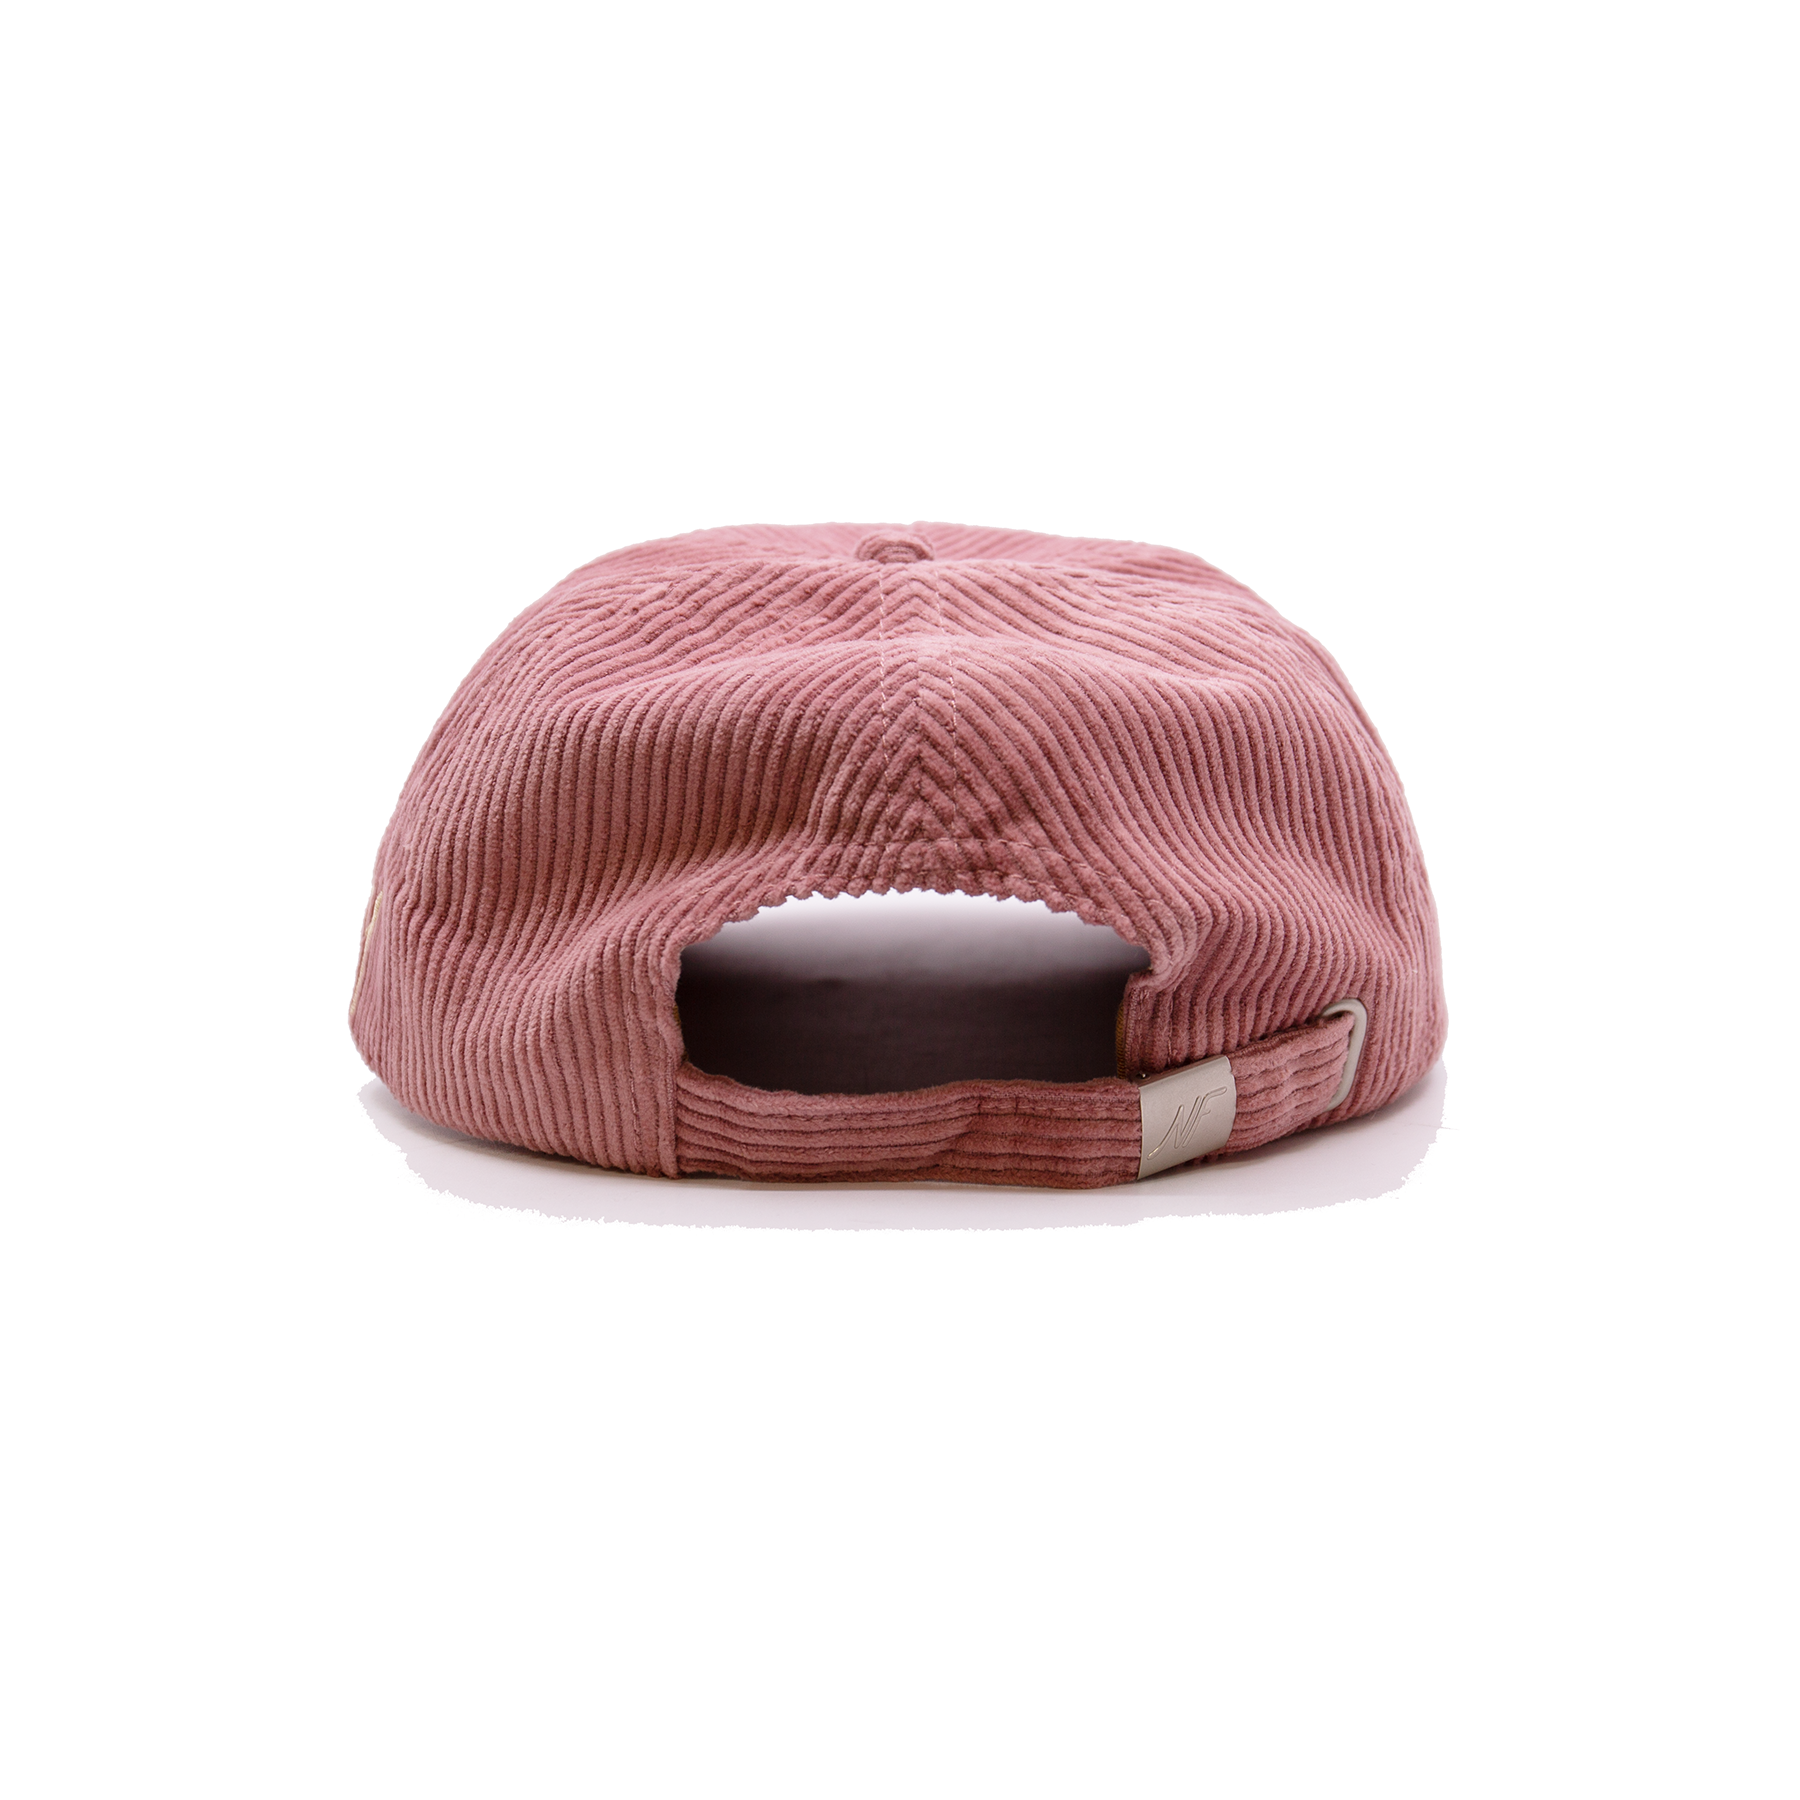 Pink corduroy baseball cap  NF Aspen leaf  embroidery graphic at front  Fat city embroidery on side  Embroidered matchstick on reverse side  One size fits all  Made in Los Angeles 